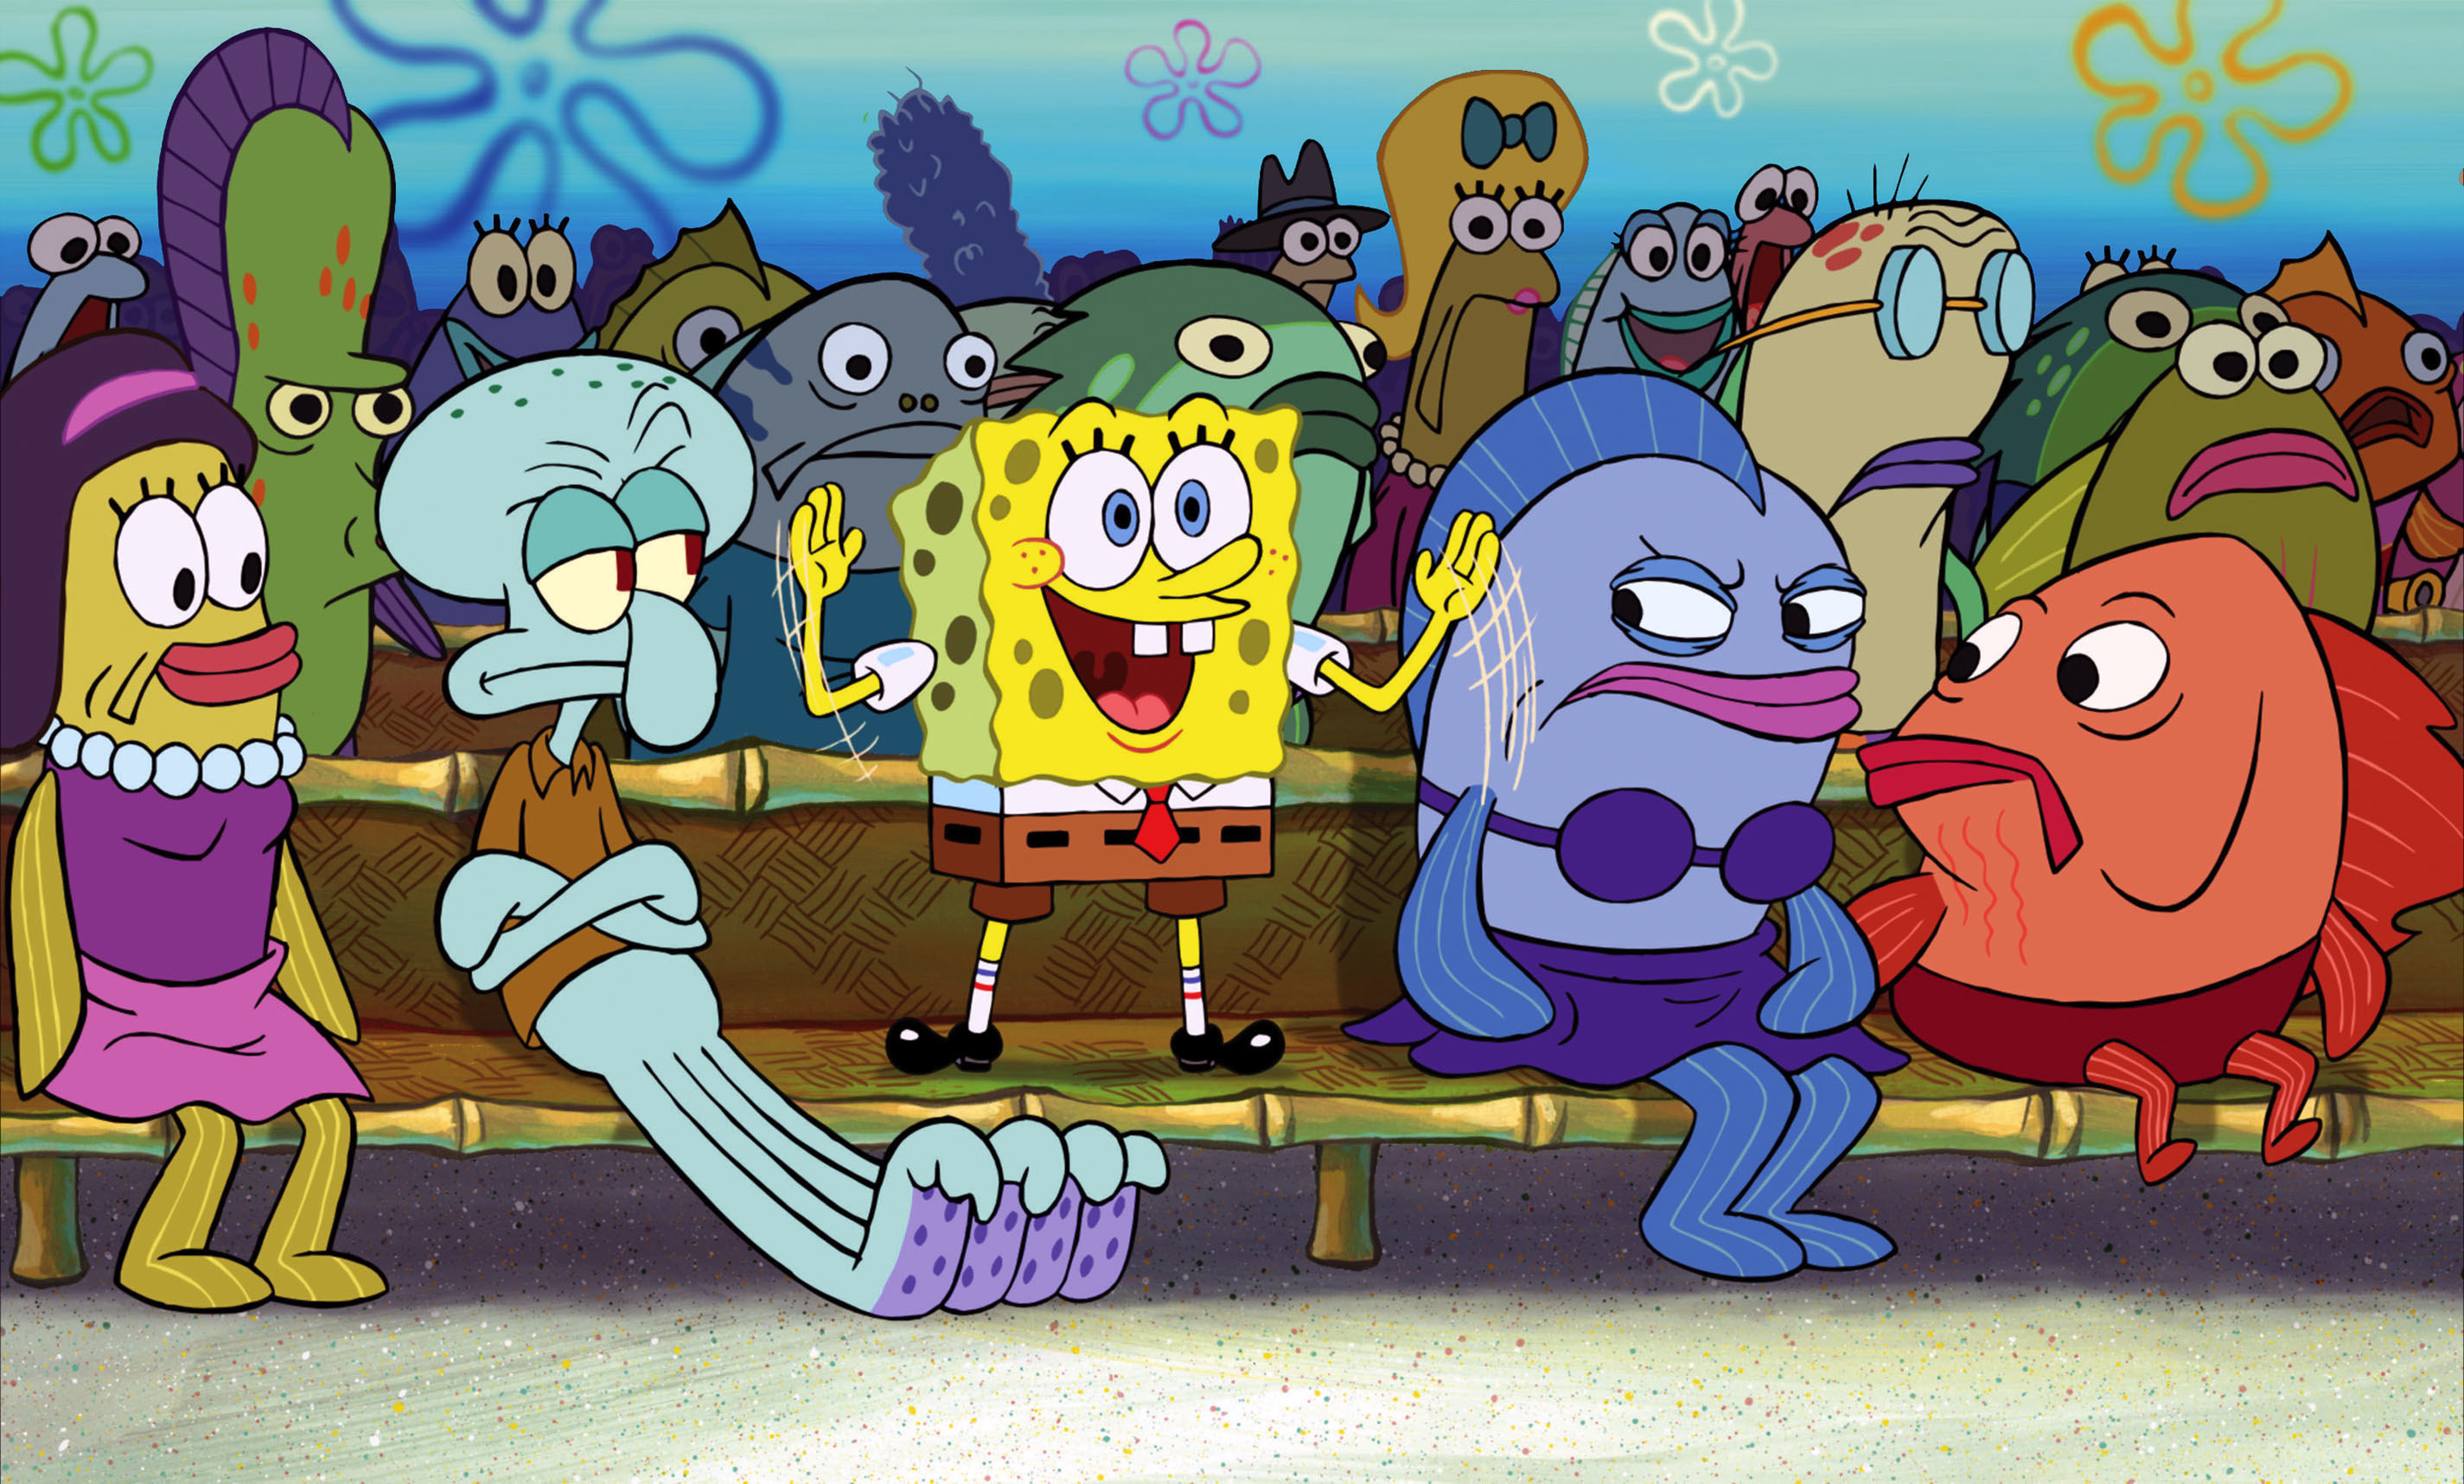 Squidward and other characters looking at an excited SpongeBob with disgust